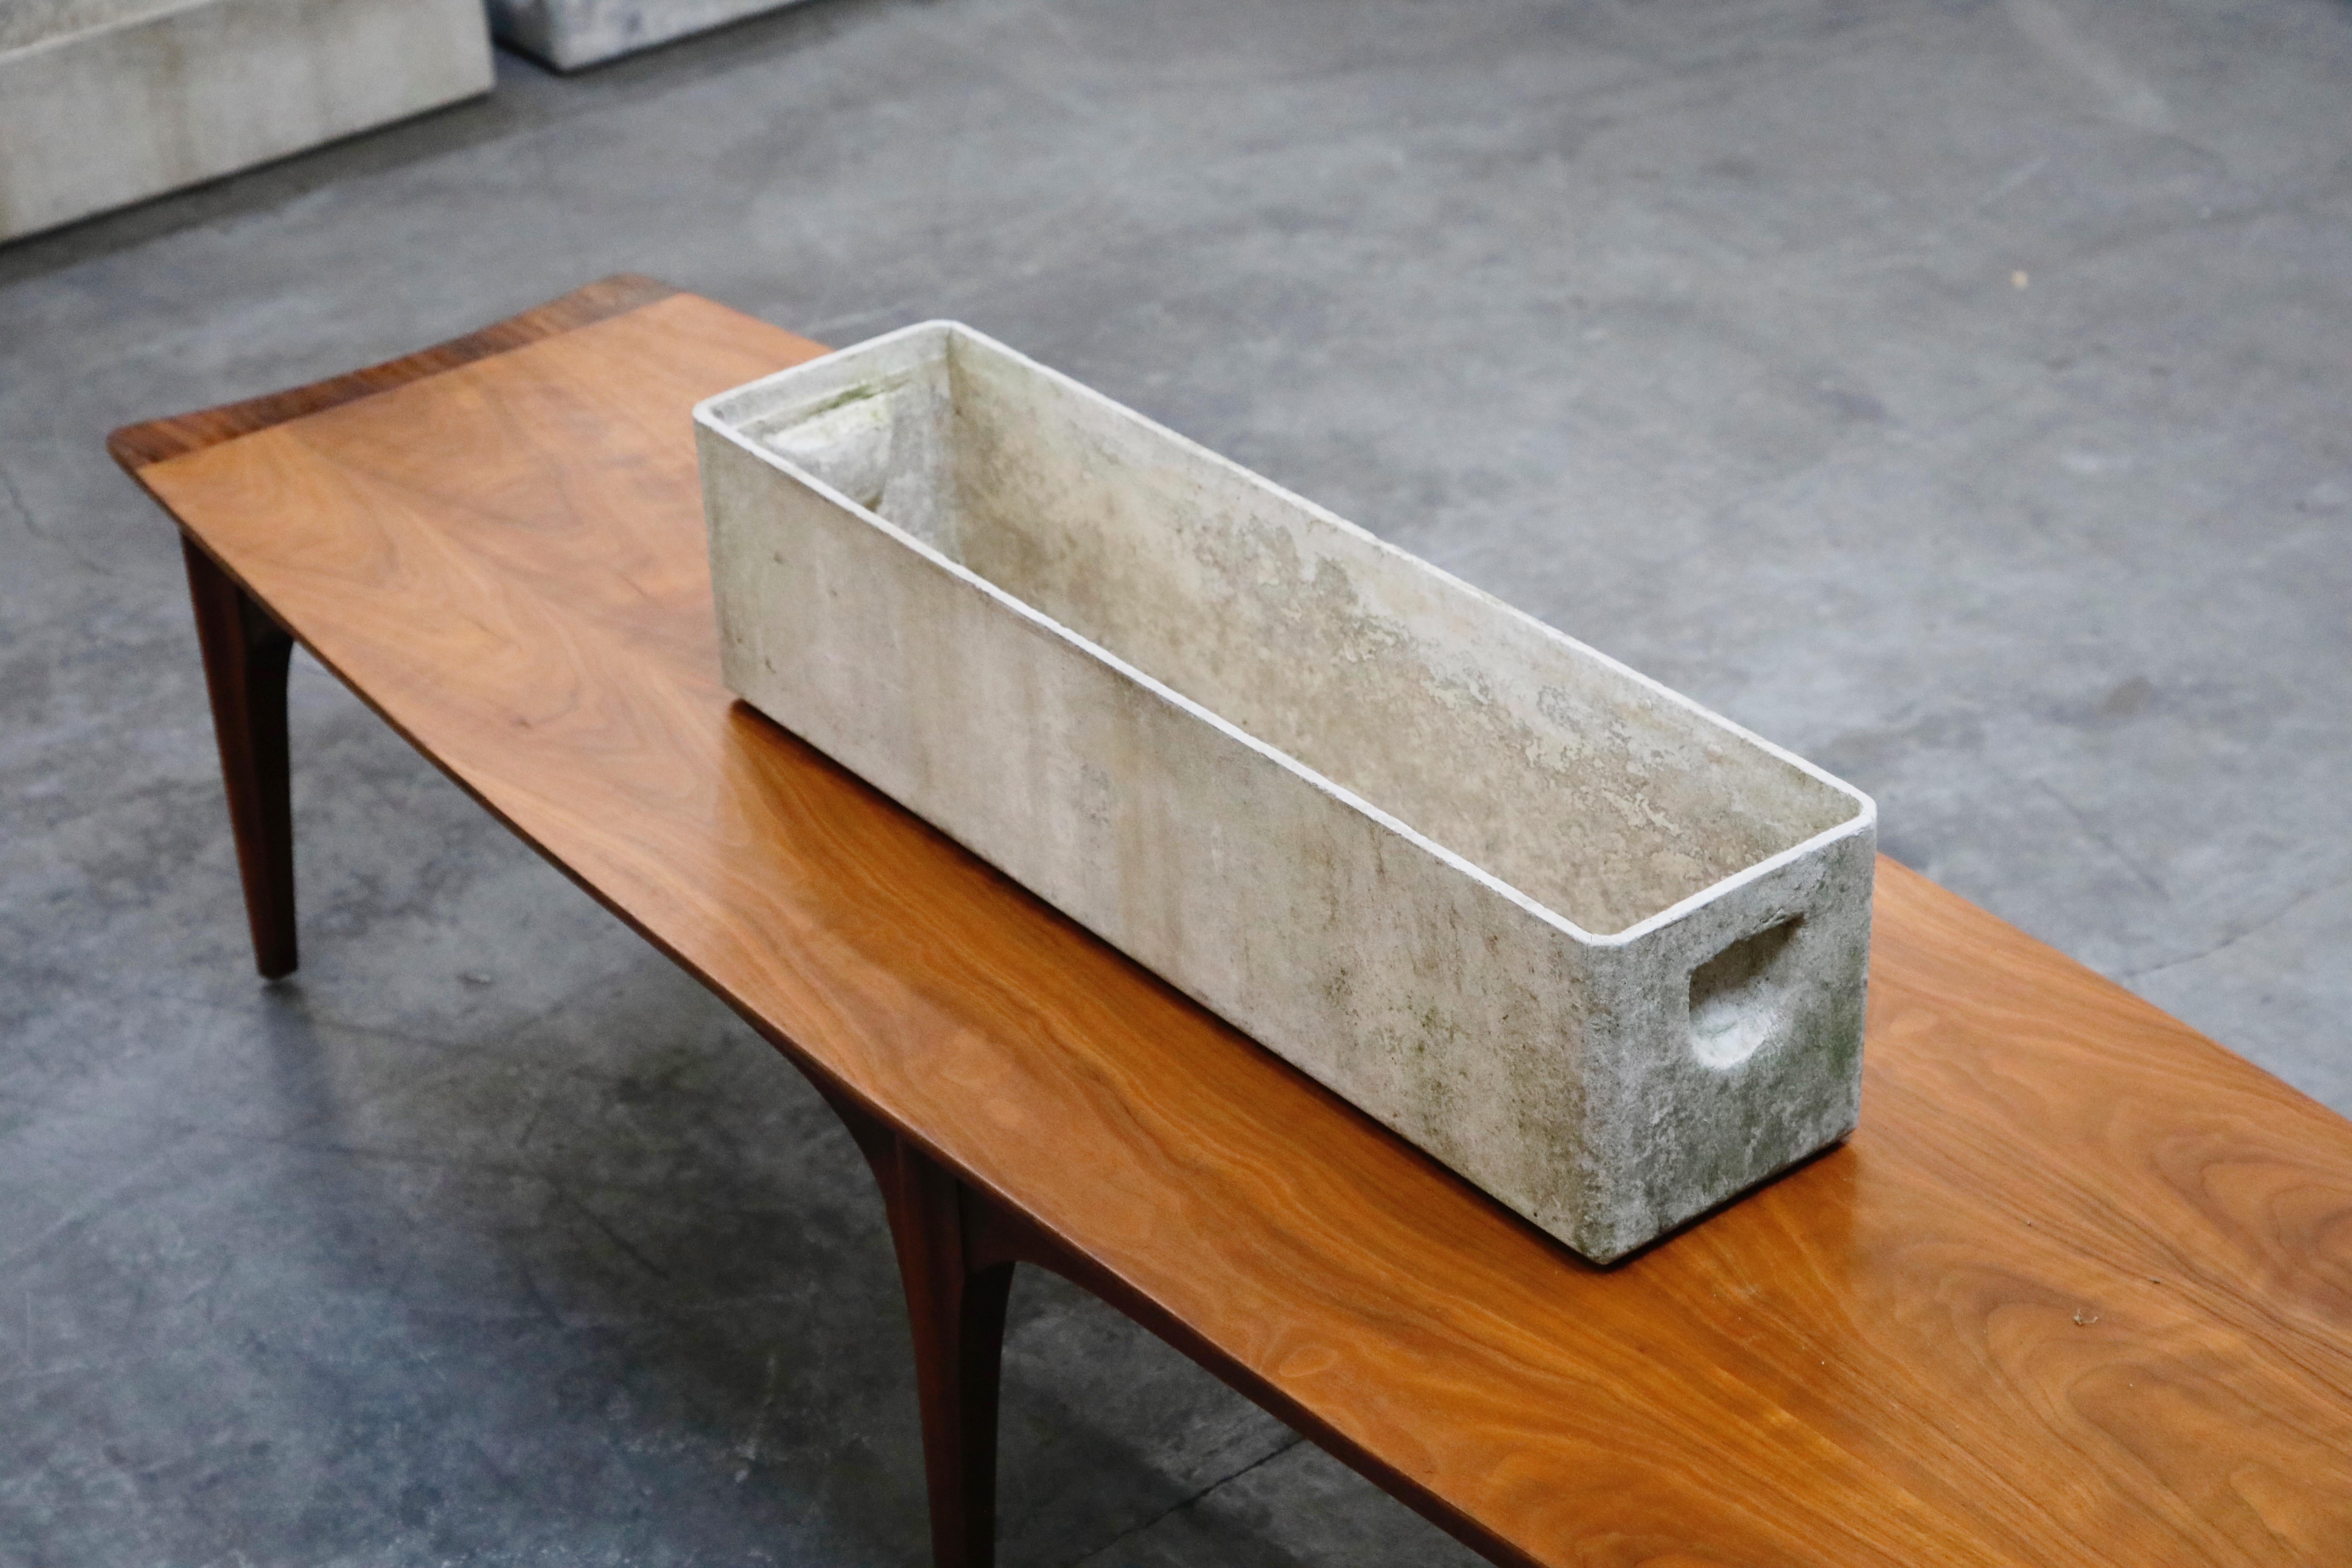 Mid-20th Century Willy Guhl for Eternit Large Rectangle Concrete Outdoor Handle Planter For Sale